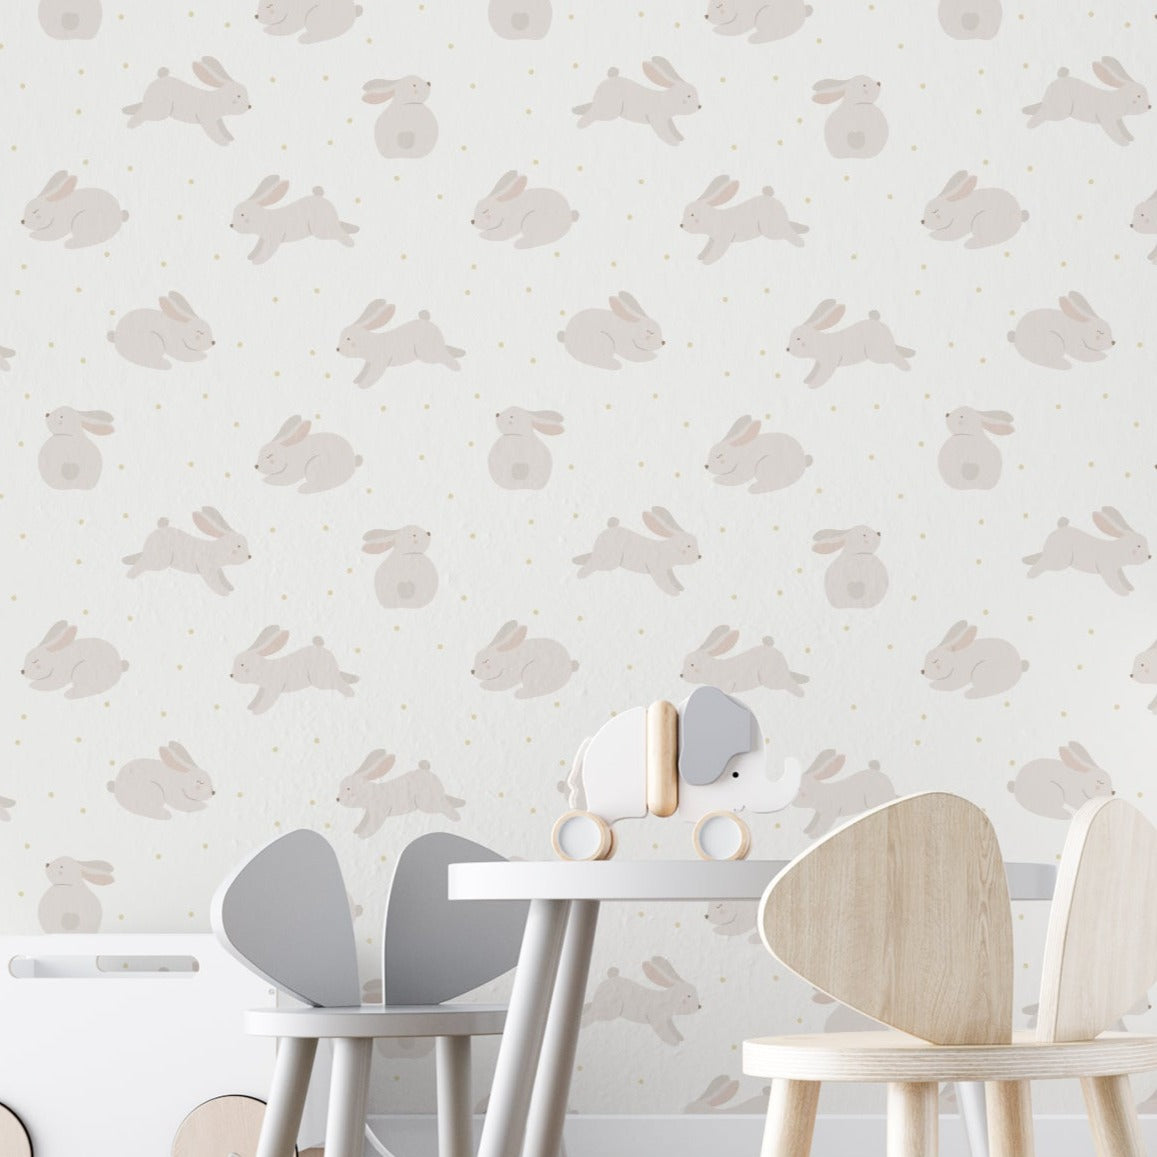 A nursery room wall covered with 'Nursery Bunny Wallpaper,' depicting adorable beige bunnies interspersed with golden dots on a light background, enhancing the tranquil and cozy ambiance of the space